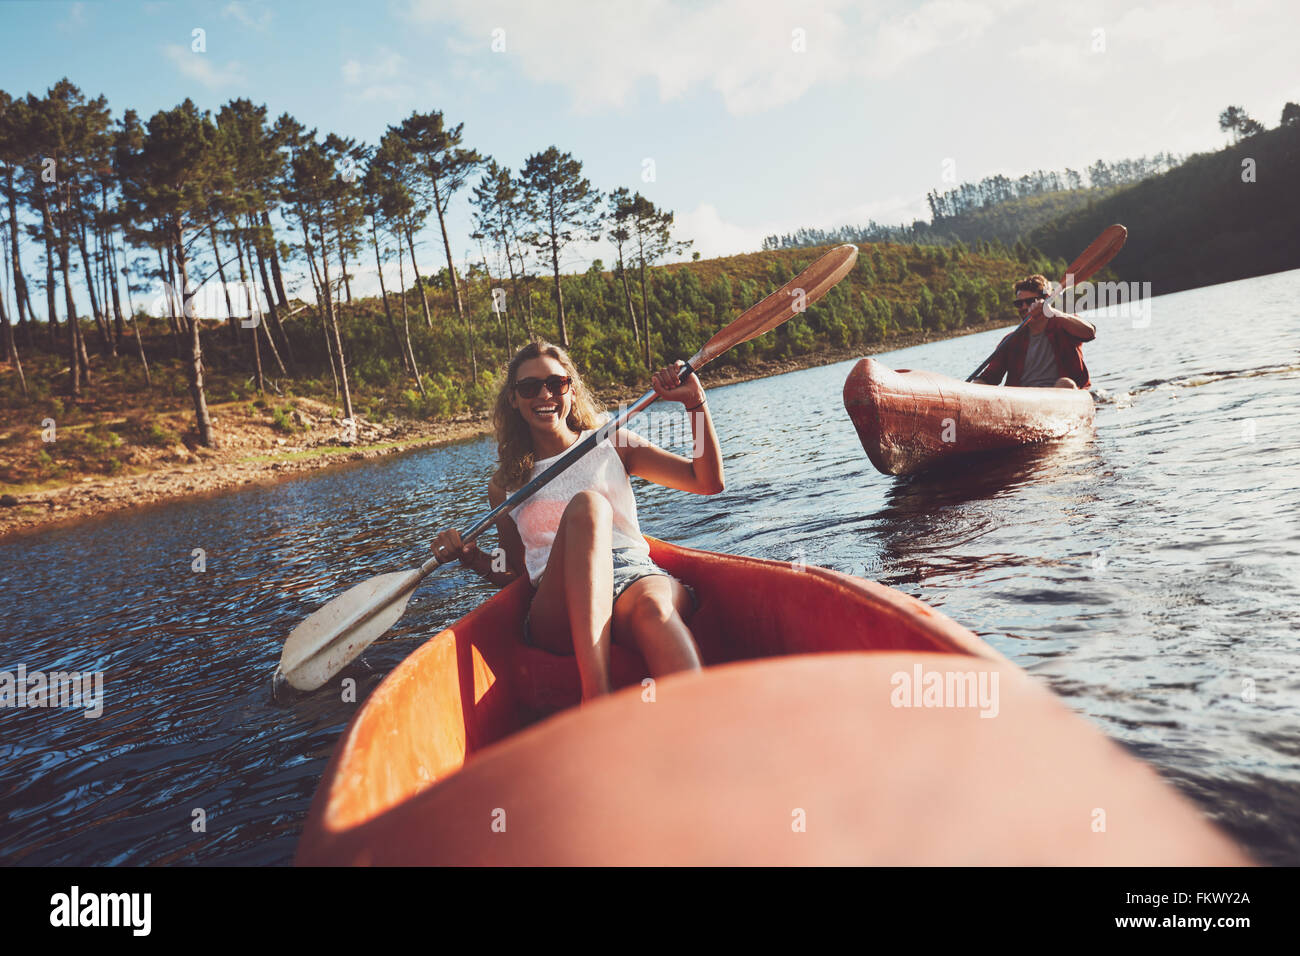 Young people kayaking on a lake. Smiling young woman kayakers with a man paddling kayak in the background. Stock Photo